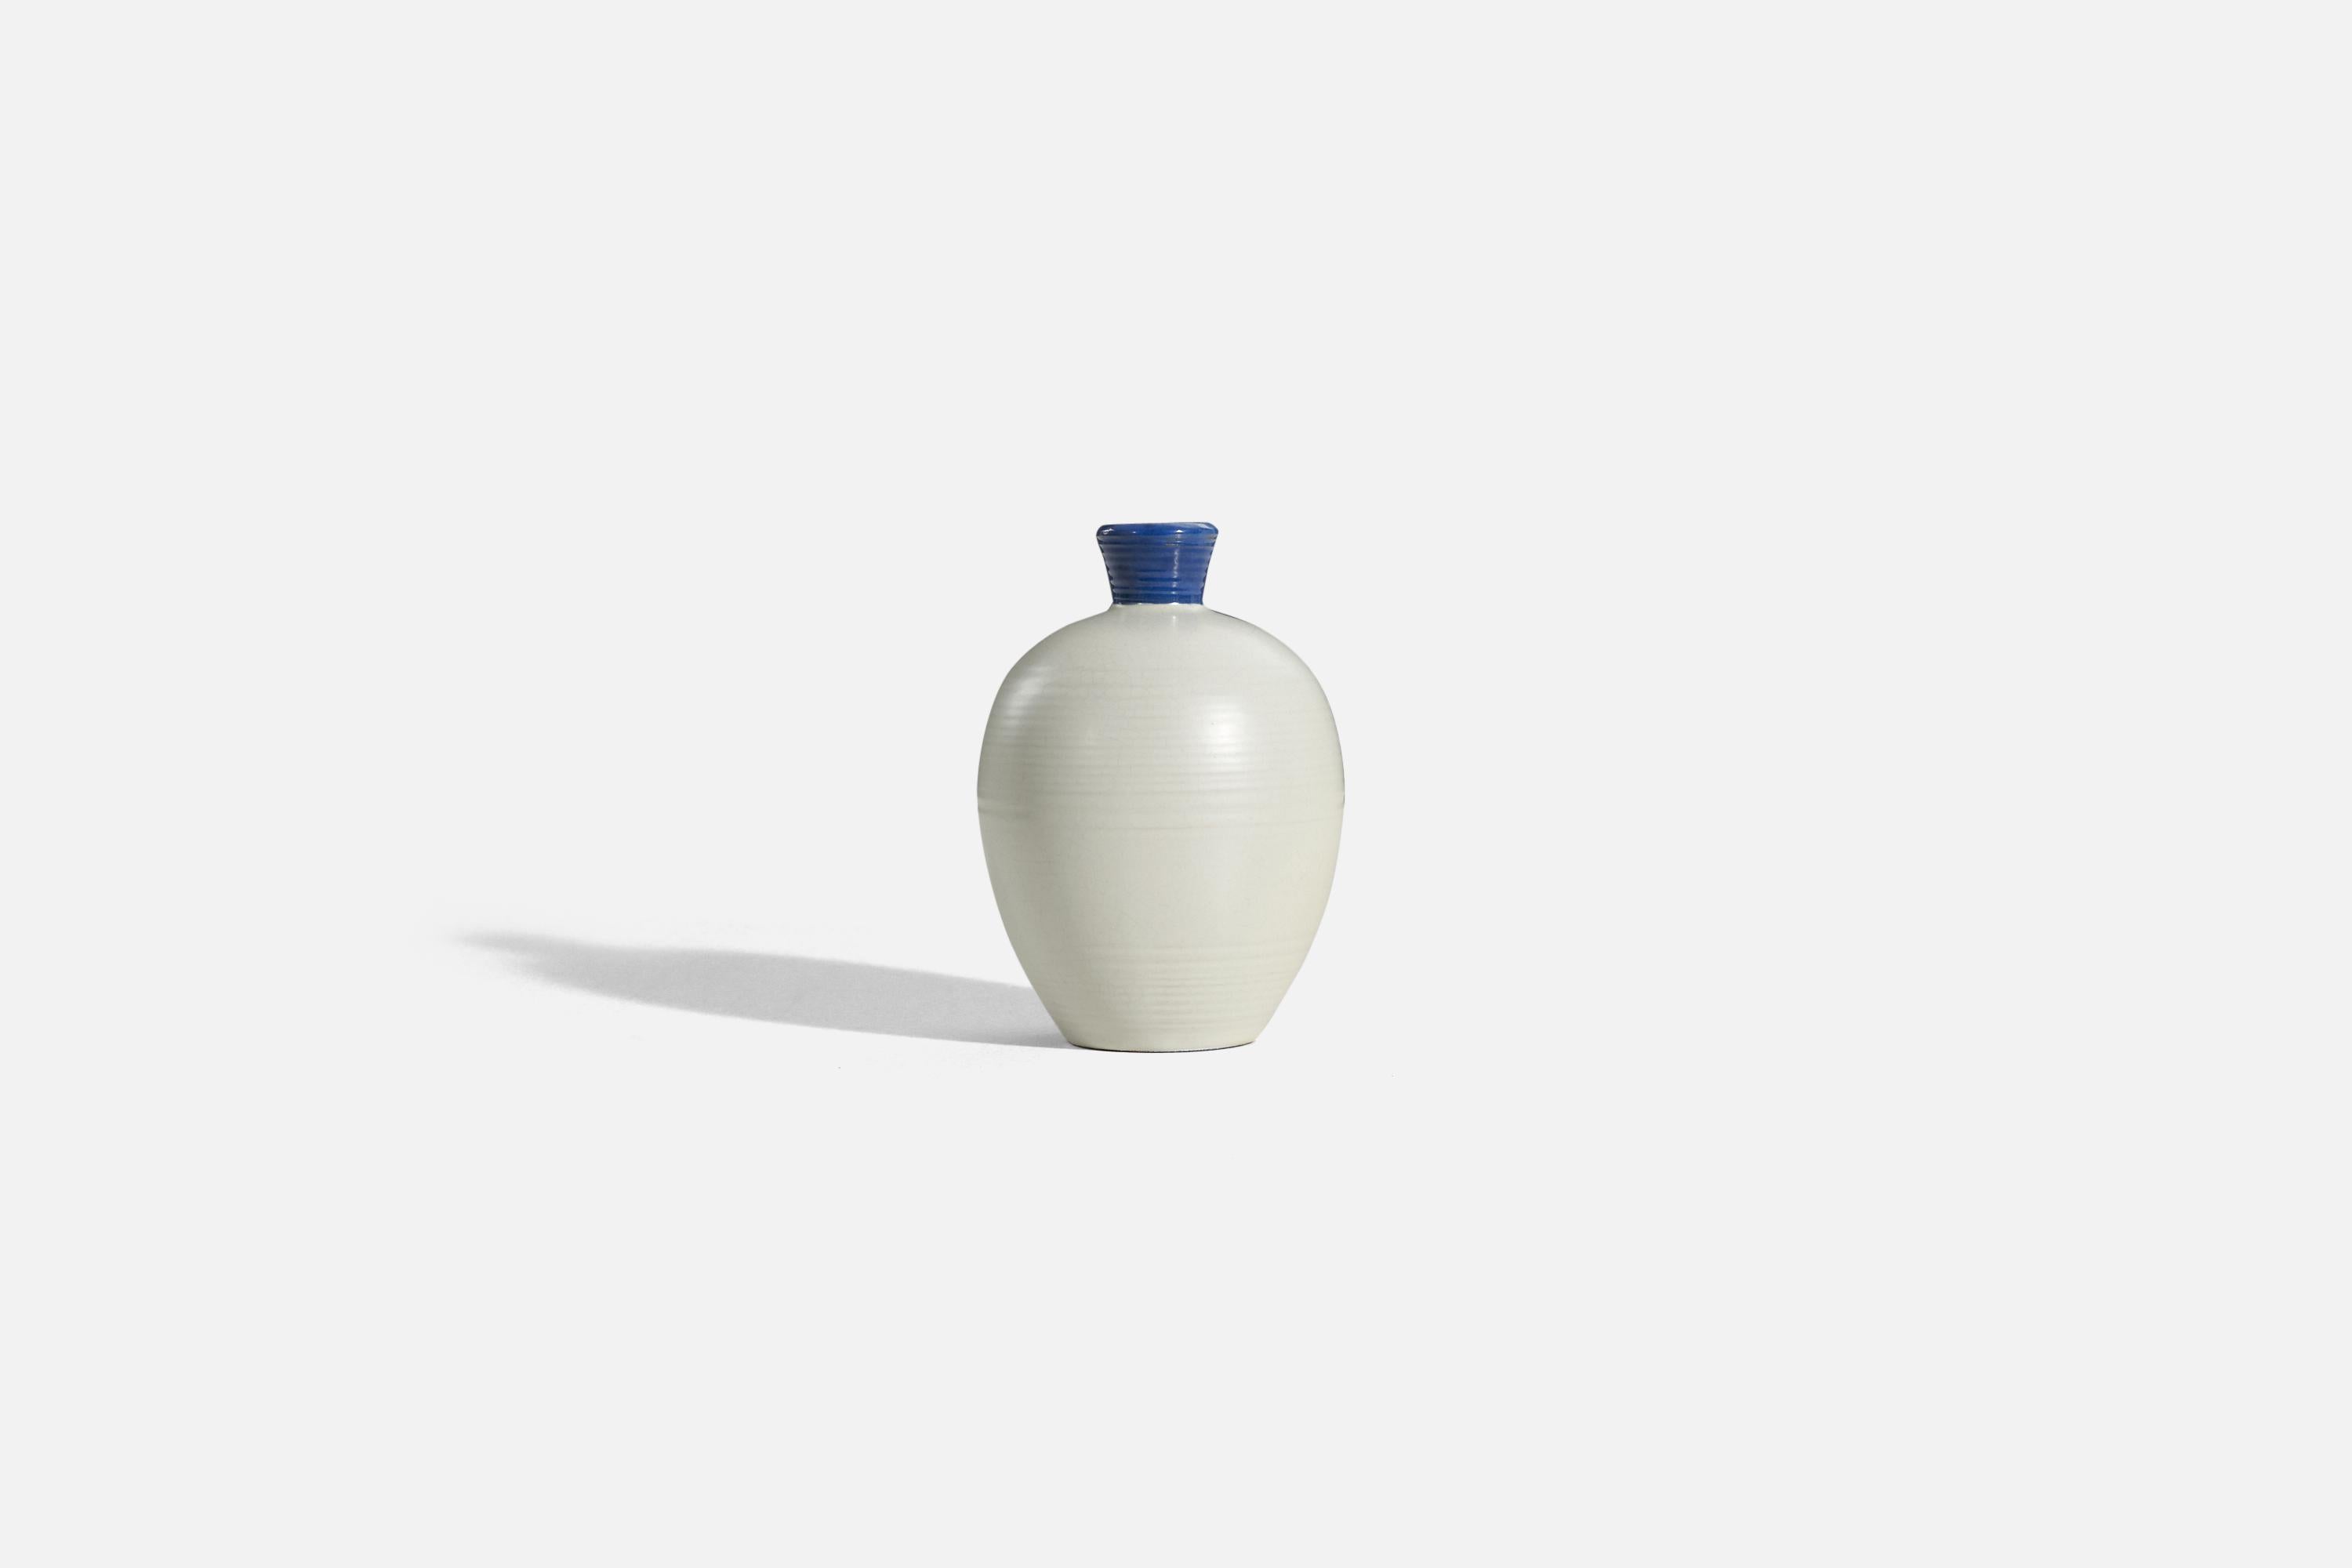 A blue and white, glazed earthenware vase designed and produced by Upsala-Ekeby, Sweden, c. 1940s.

